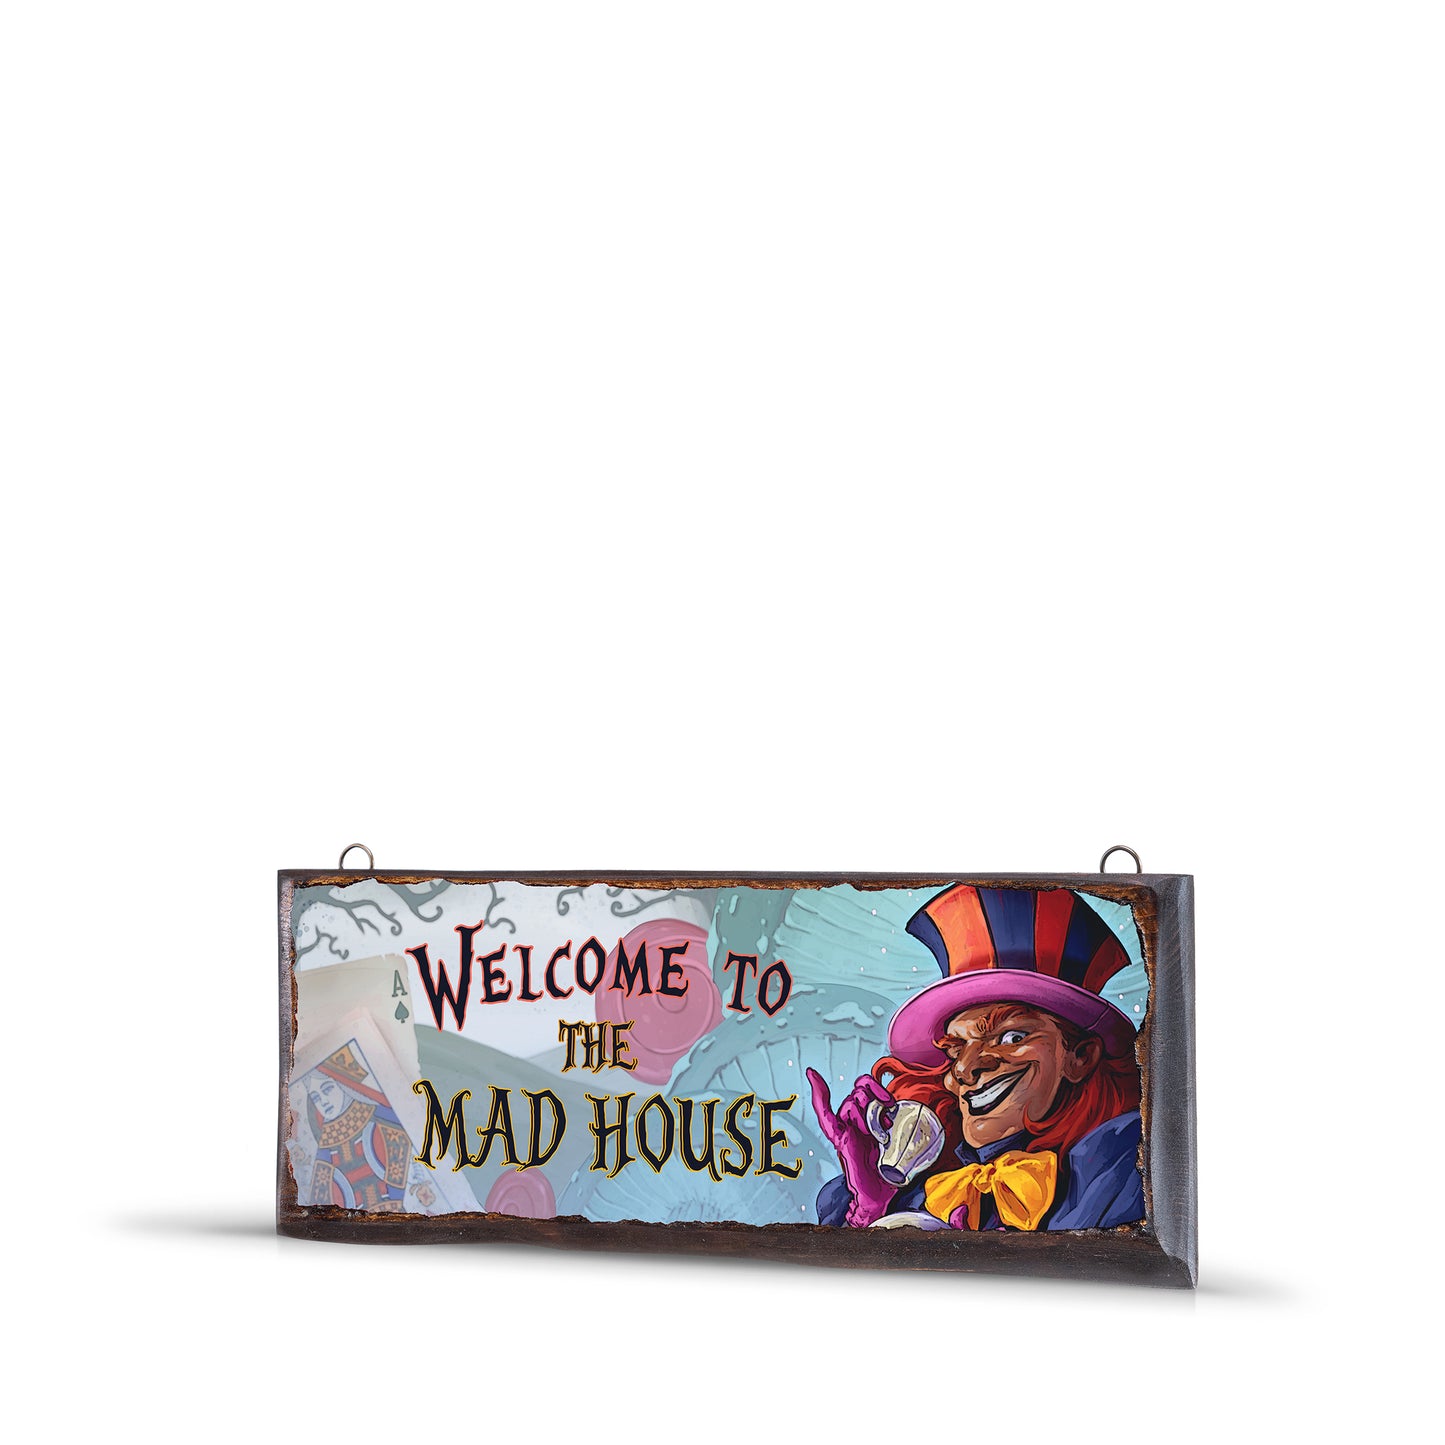 WELCOME TO THE MAD HOUSE WOODEN SIGN - WS030